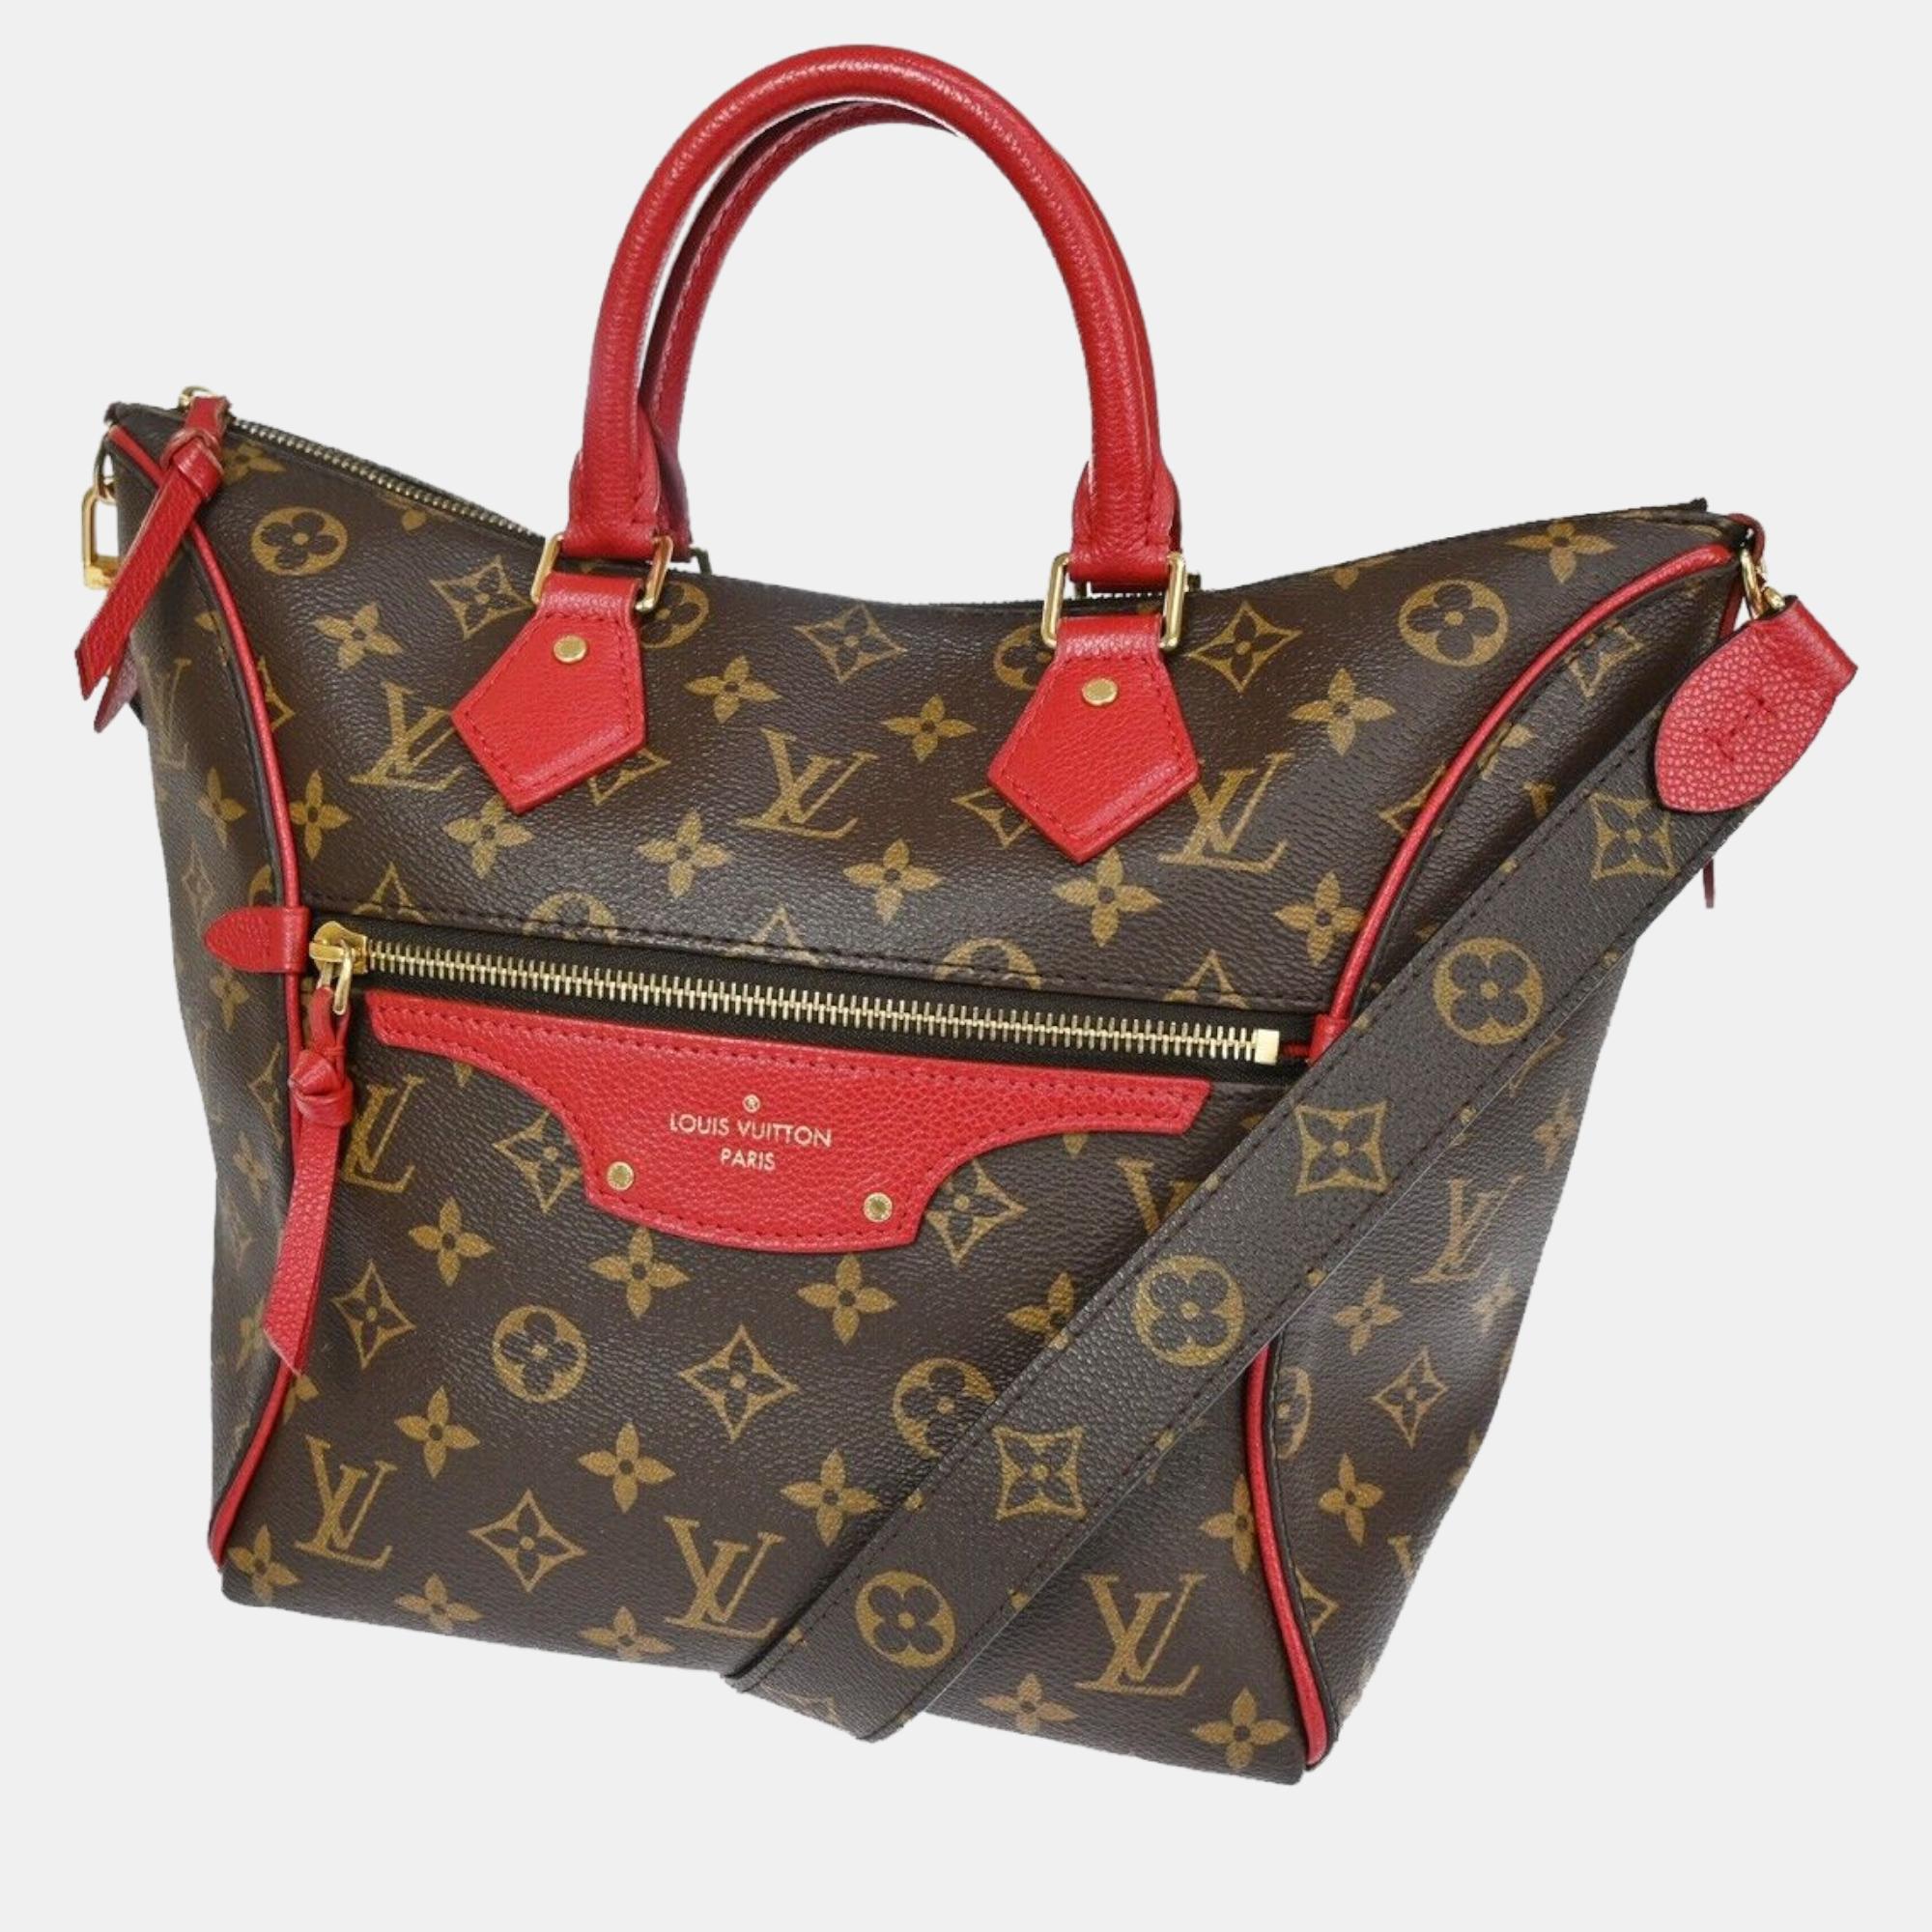 Elevate your every day with this Louis Vuitton tote. Meticulously designed it seamlessly blends functionality with luxury offering the perfect accessory to showcase your discerning style while effortlessly carrying your essentials.